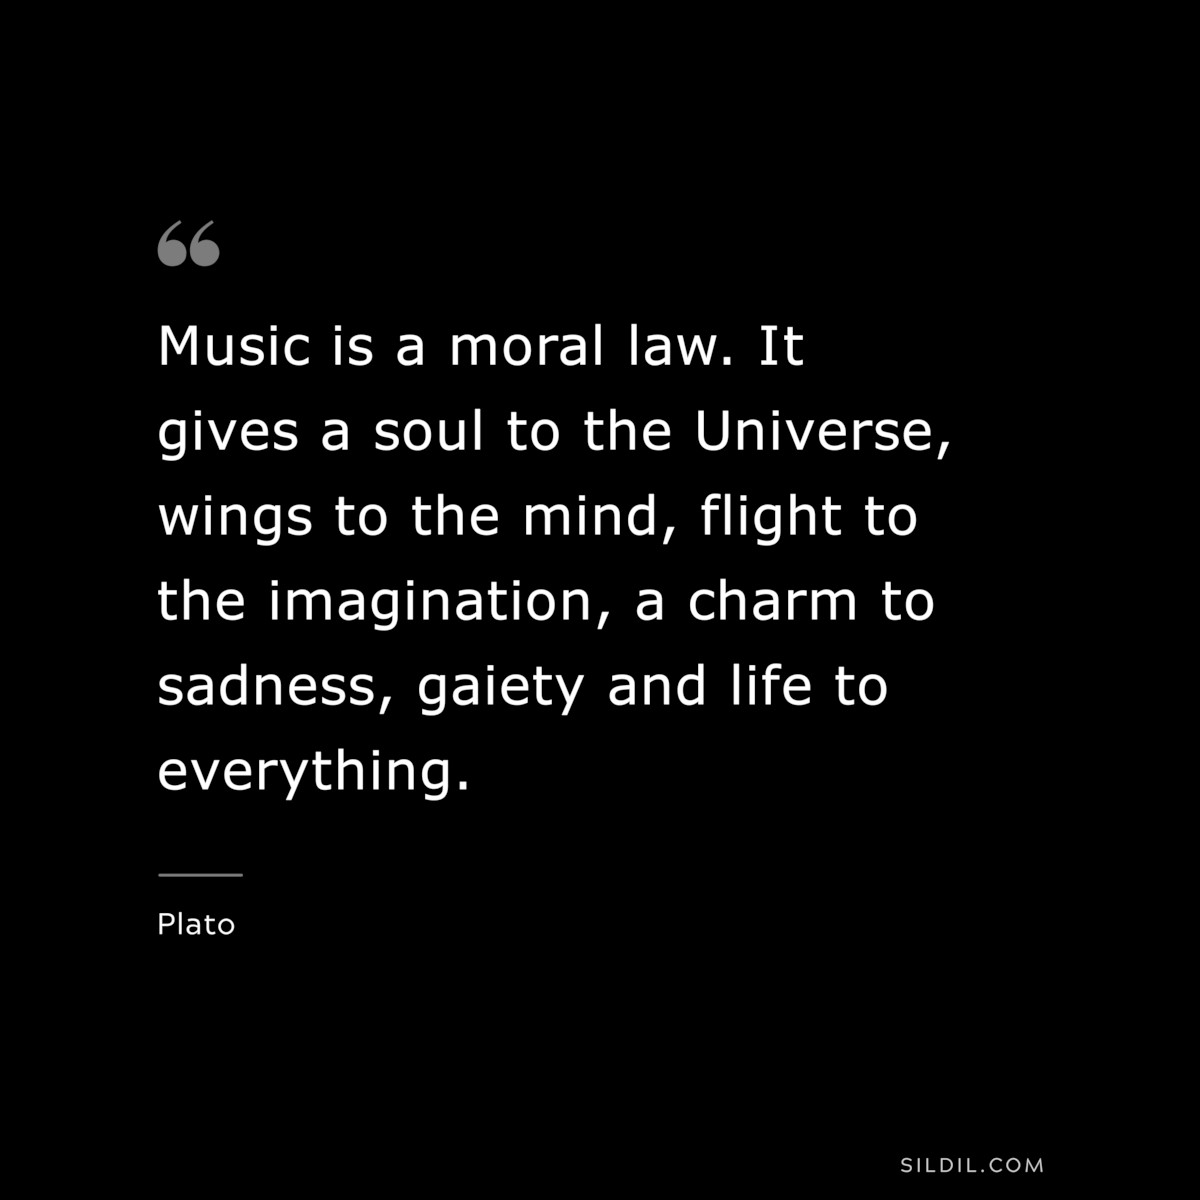 Music is a moral law. It gives a soul to the Universe, wings to the mind, flight to the imagination, a charm to sadness, gaiety and life to everything ― Plato